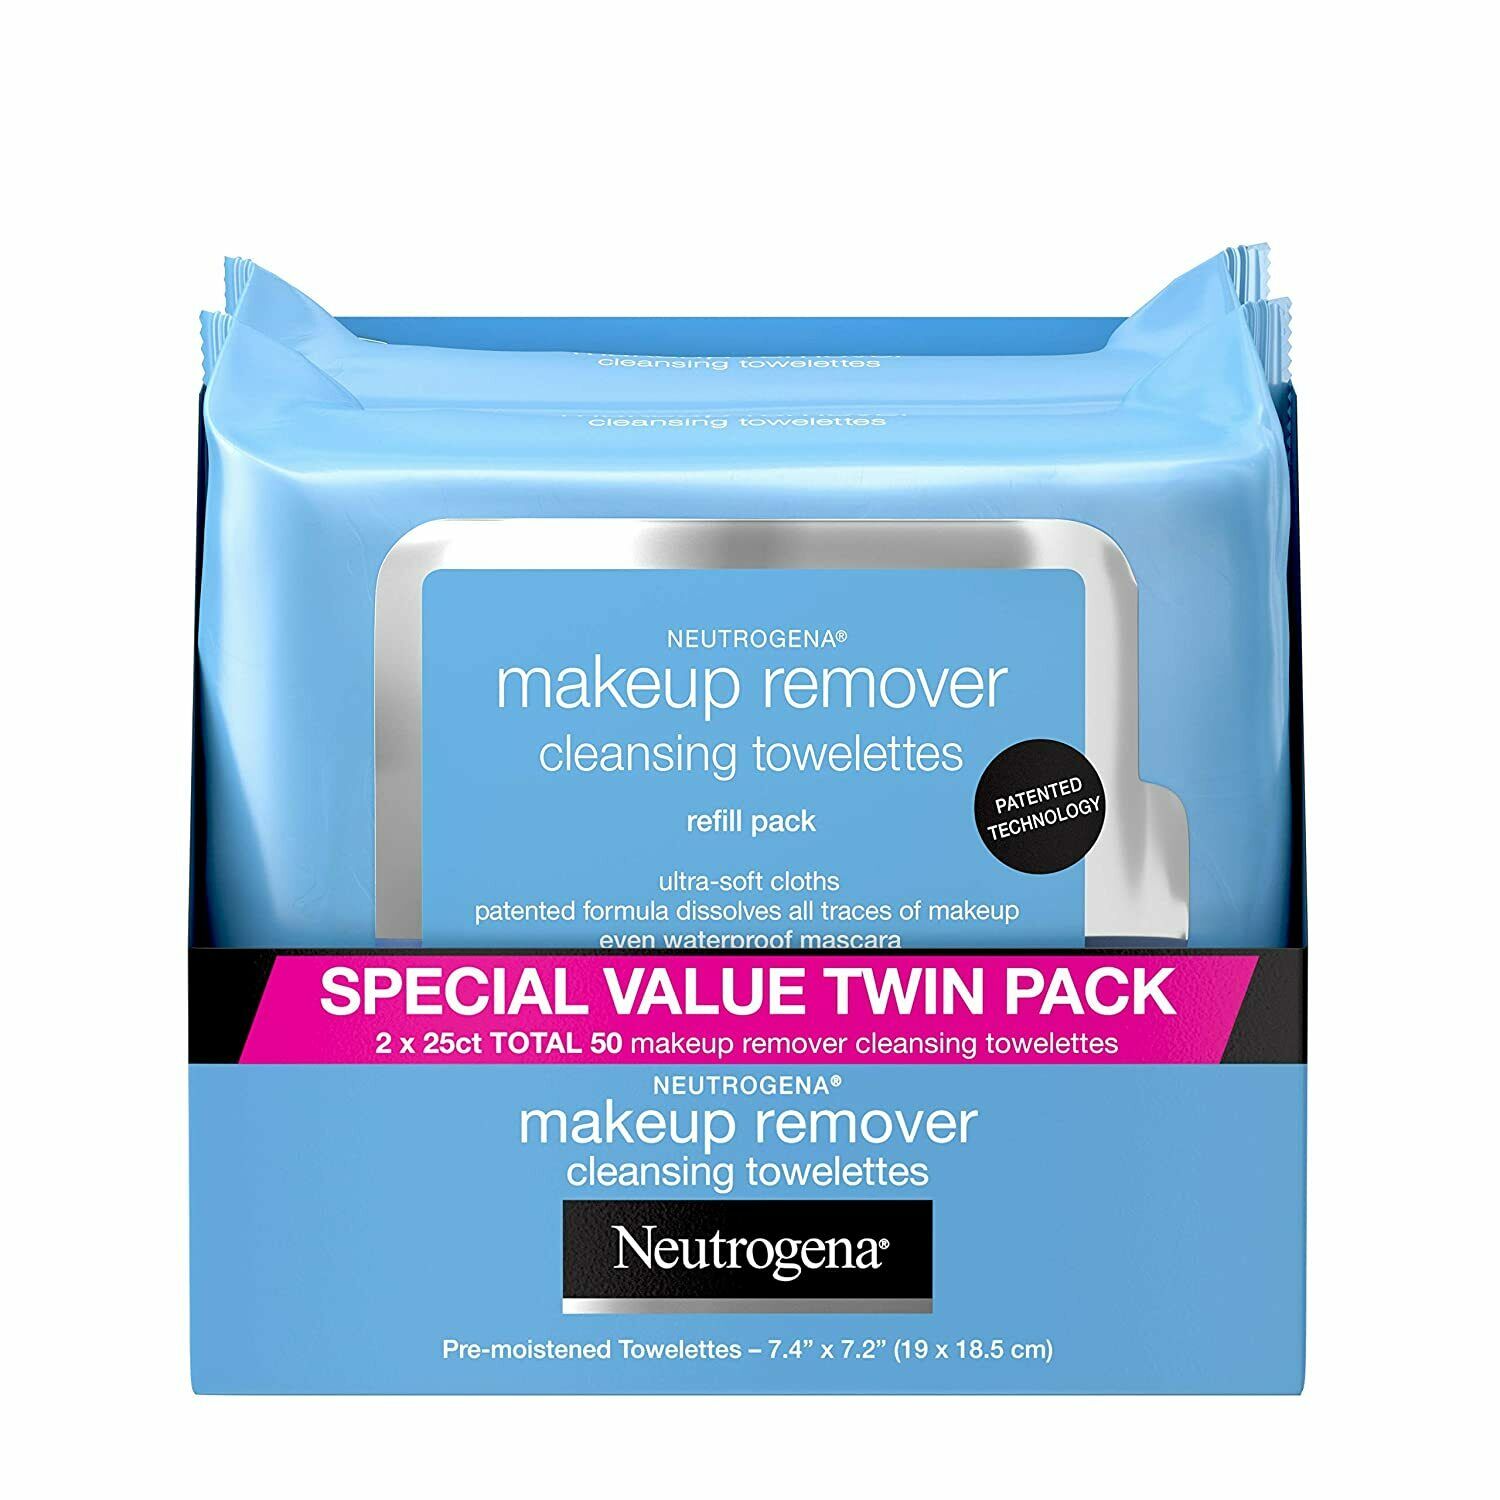 Neutrogena Makeup Remover Cleansing Face Wipes, Daily Cleansing Facial Towelette